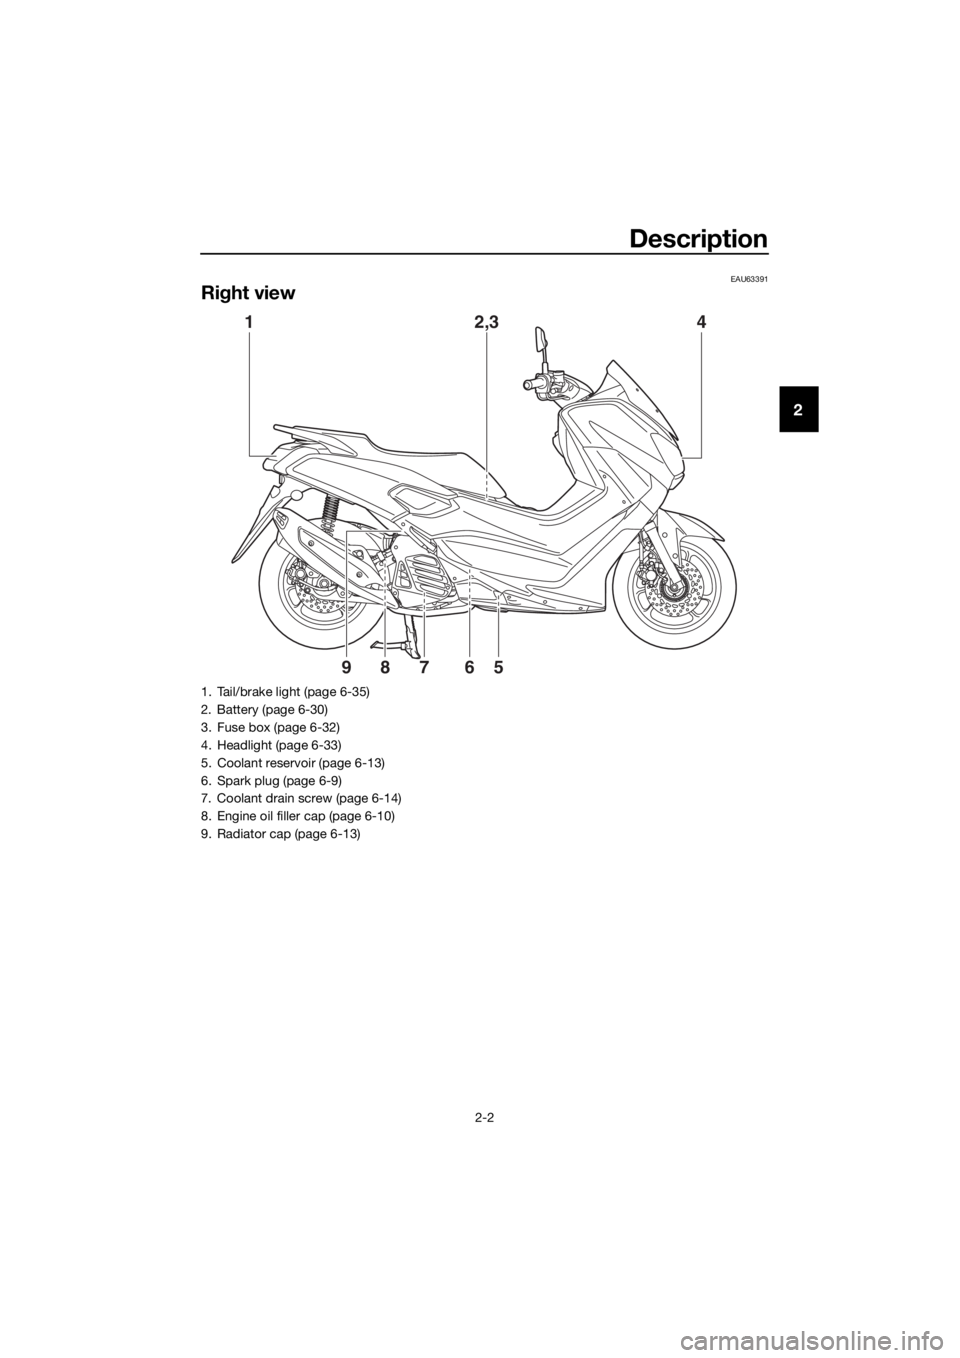 YAMAHA NMAX 125 2018  Owners Manual Description
2-2
2
EAU63391
Right view
1 2,34
567
89
1. Tail/brake light (page 6-35)
2. Battery (page 6-30)
3. Fuse box (page 6-32)
4. Headlight (page 6-33)
5. Coolant reservoir (page 6-13)
6. Spark pl